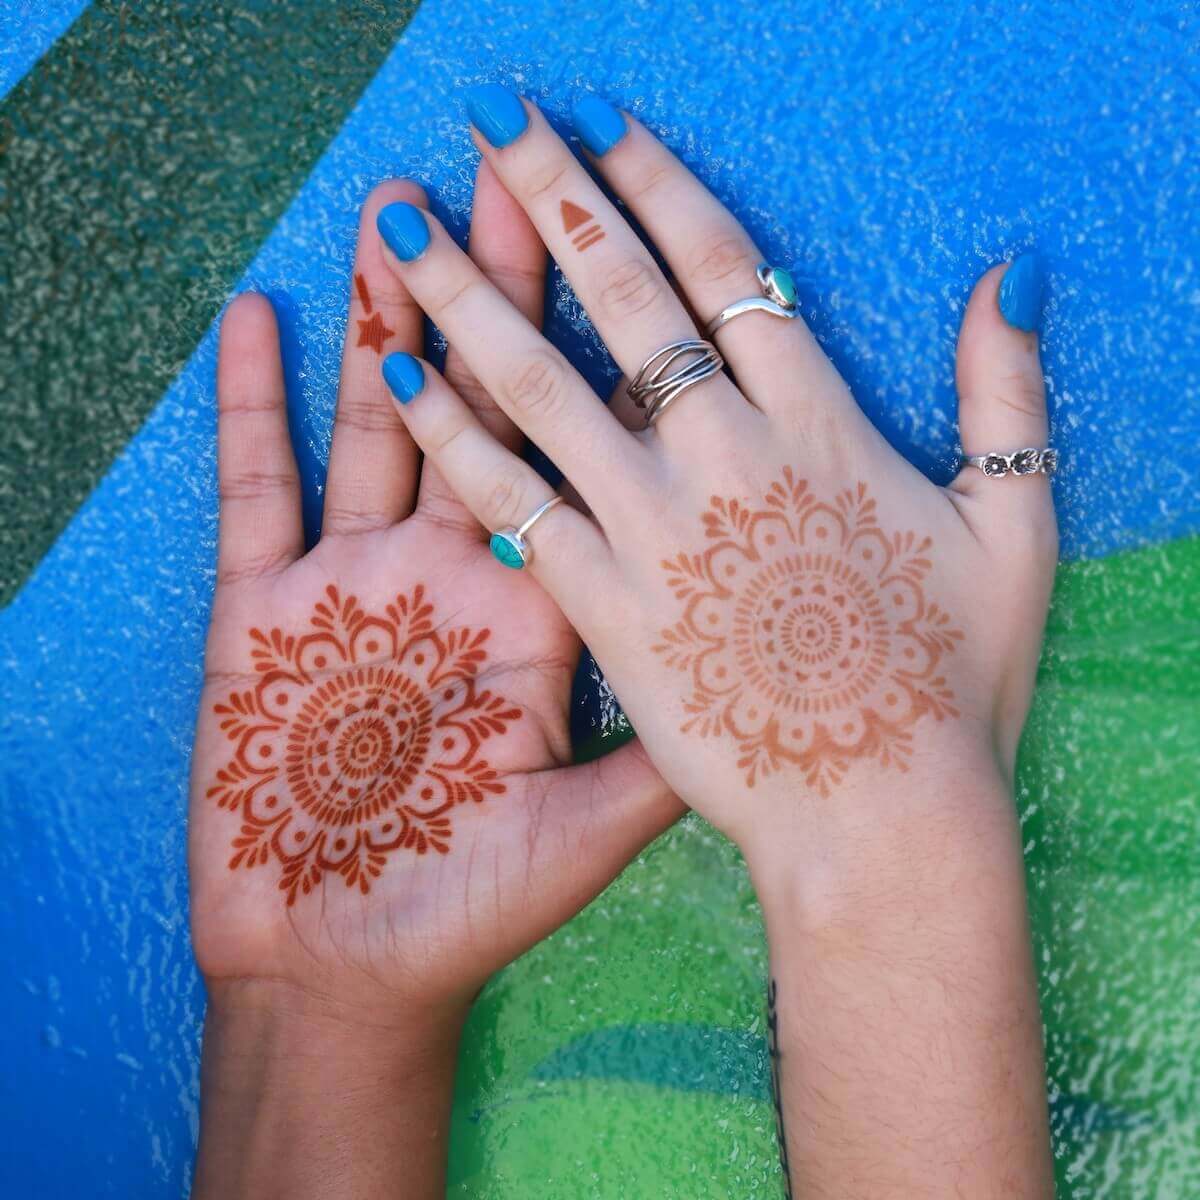 Matching little mandala tattoos on hands for a couple | Couples tattoo  designs, Tattoo designs, Cute couple tattoos